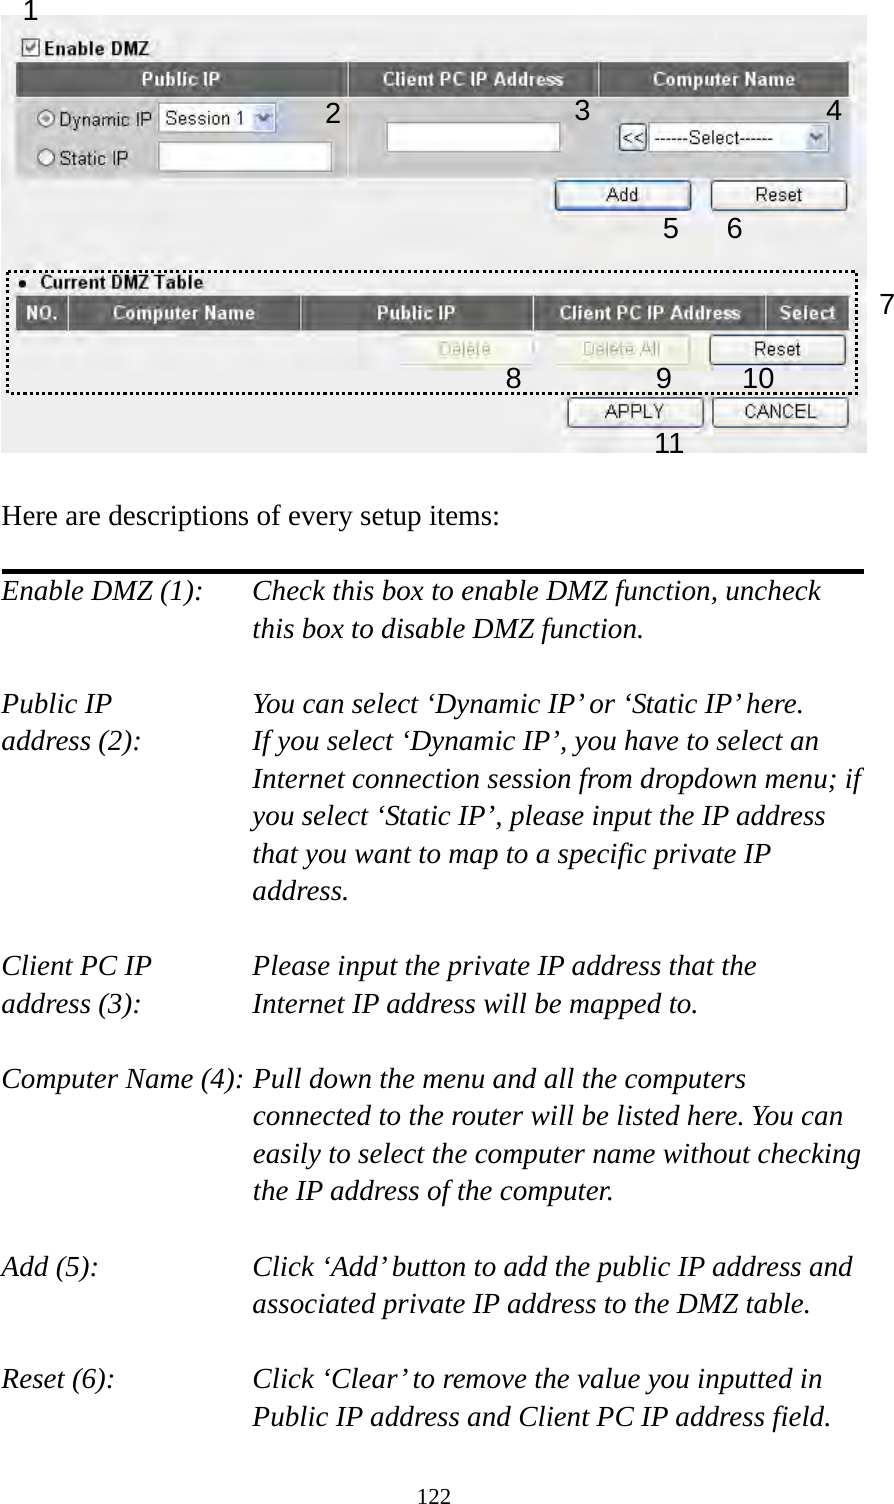 122   Here are descriptions of every setup items:  Enable DMZ (1):    Check this box to enable DMZ function, uncheck this box to disable DMZ function.  Public IP        You can select ‘Dynamic IP’ or ‘Static IP’ here. address (2):    If you select ‘Dynamic IP’, you have to select an Internet connection session from dropdown menu; if you select ‘Static IP’, please input the IP address that you want to map to a specific private IP address.  Client PC IP      Please input the private IP address that the address (3):      Internet IP address will be mapped to.  Computer Name (4): Pull down the menu and all the computers connected to the router will be listed here. You can easily to select the computer name without checking the IP address of the computer.  Add (5):    Click ‘Add’ button to add the public IP address and associated private IP address to the DMZ table.  Reset (6):    Click ‘Clear’ to remove the value you inputted in Public IP address and Client PC IP address field. 1 2456 78 9 10 113